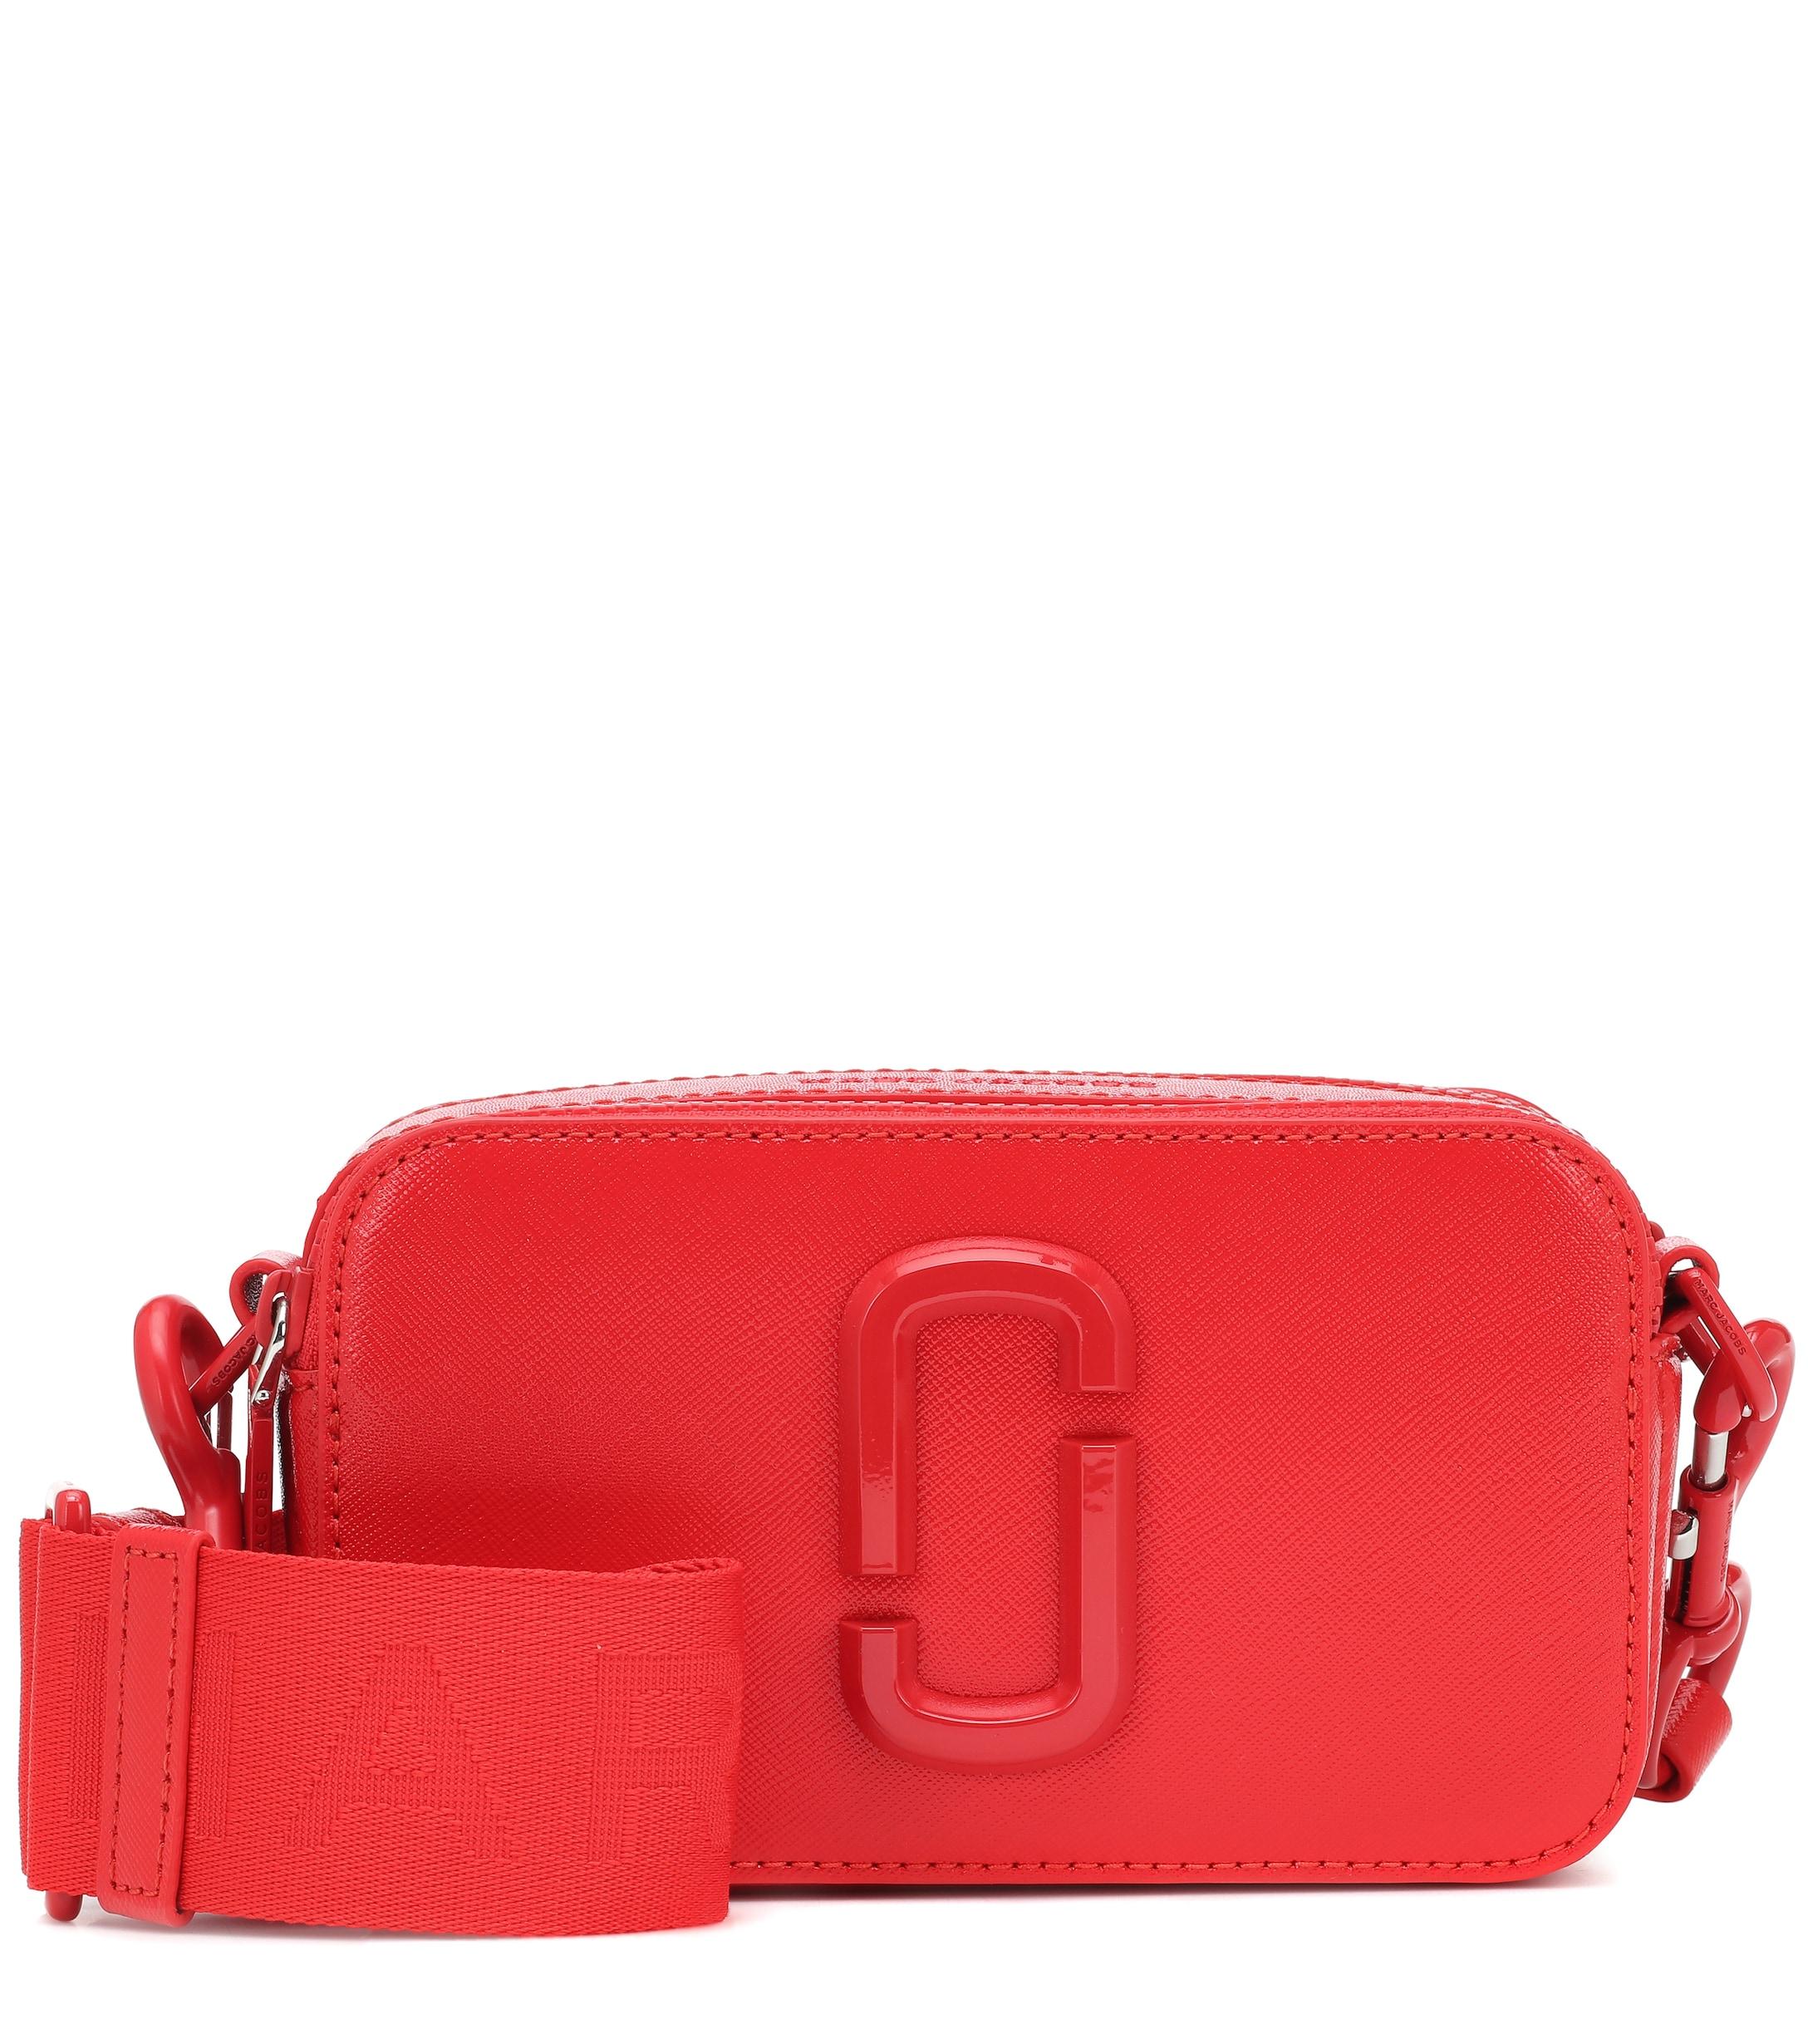 Marc Jacobs Snapshot Dtm Small Camera Bag in Red - Lyst